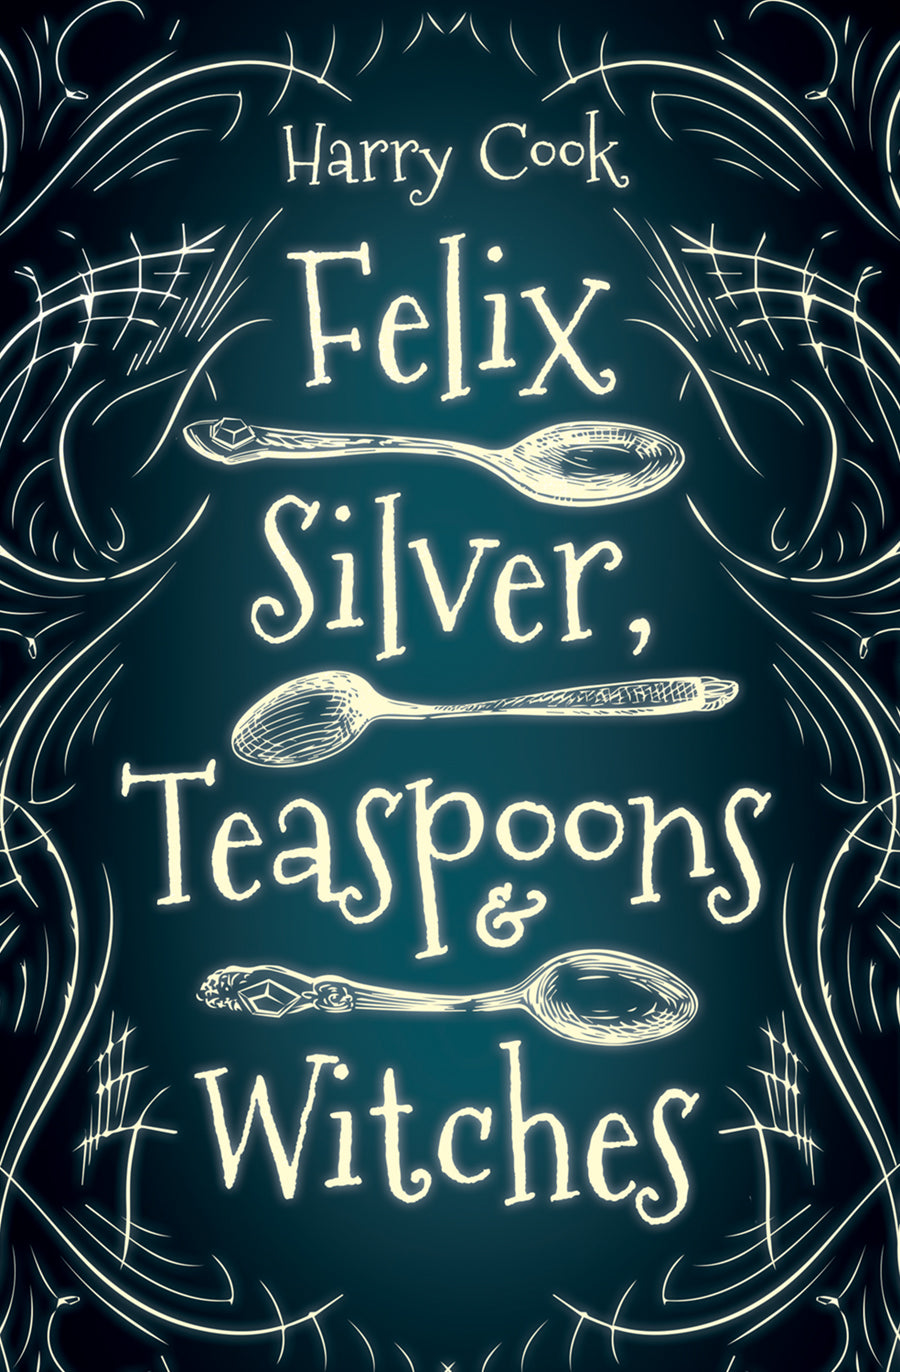 Felix Silver, Teaspoons & Witches (eBook package)